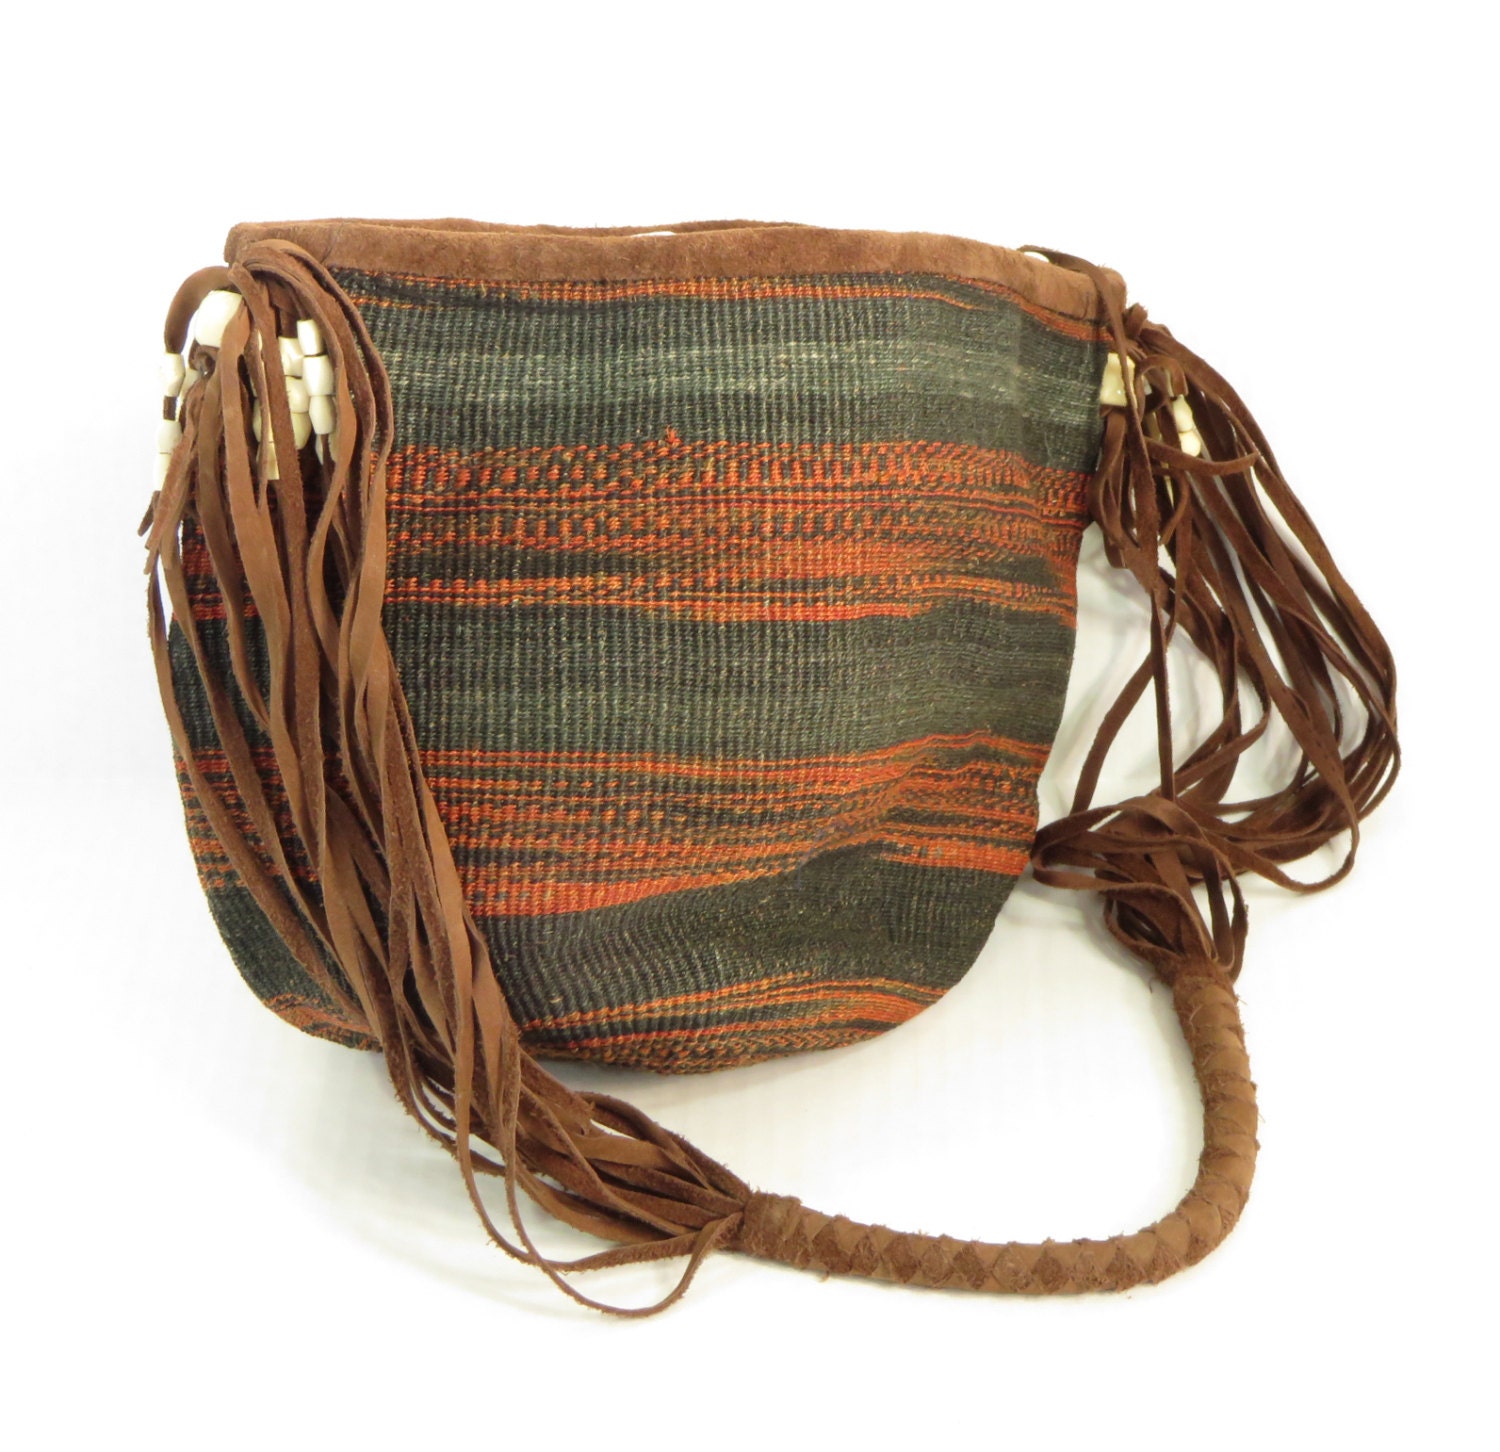 Bohemian African straw bag / purse with leather strap and bone